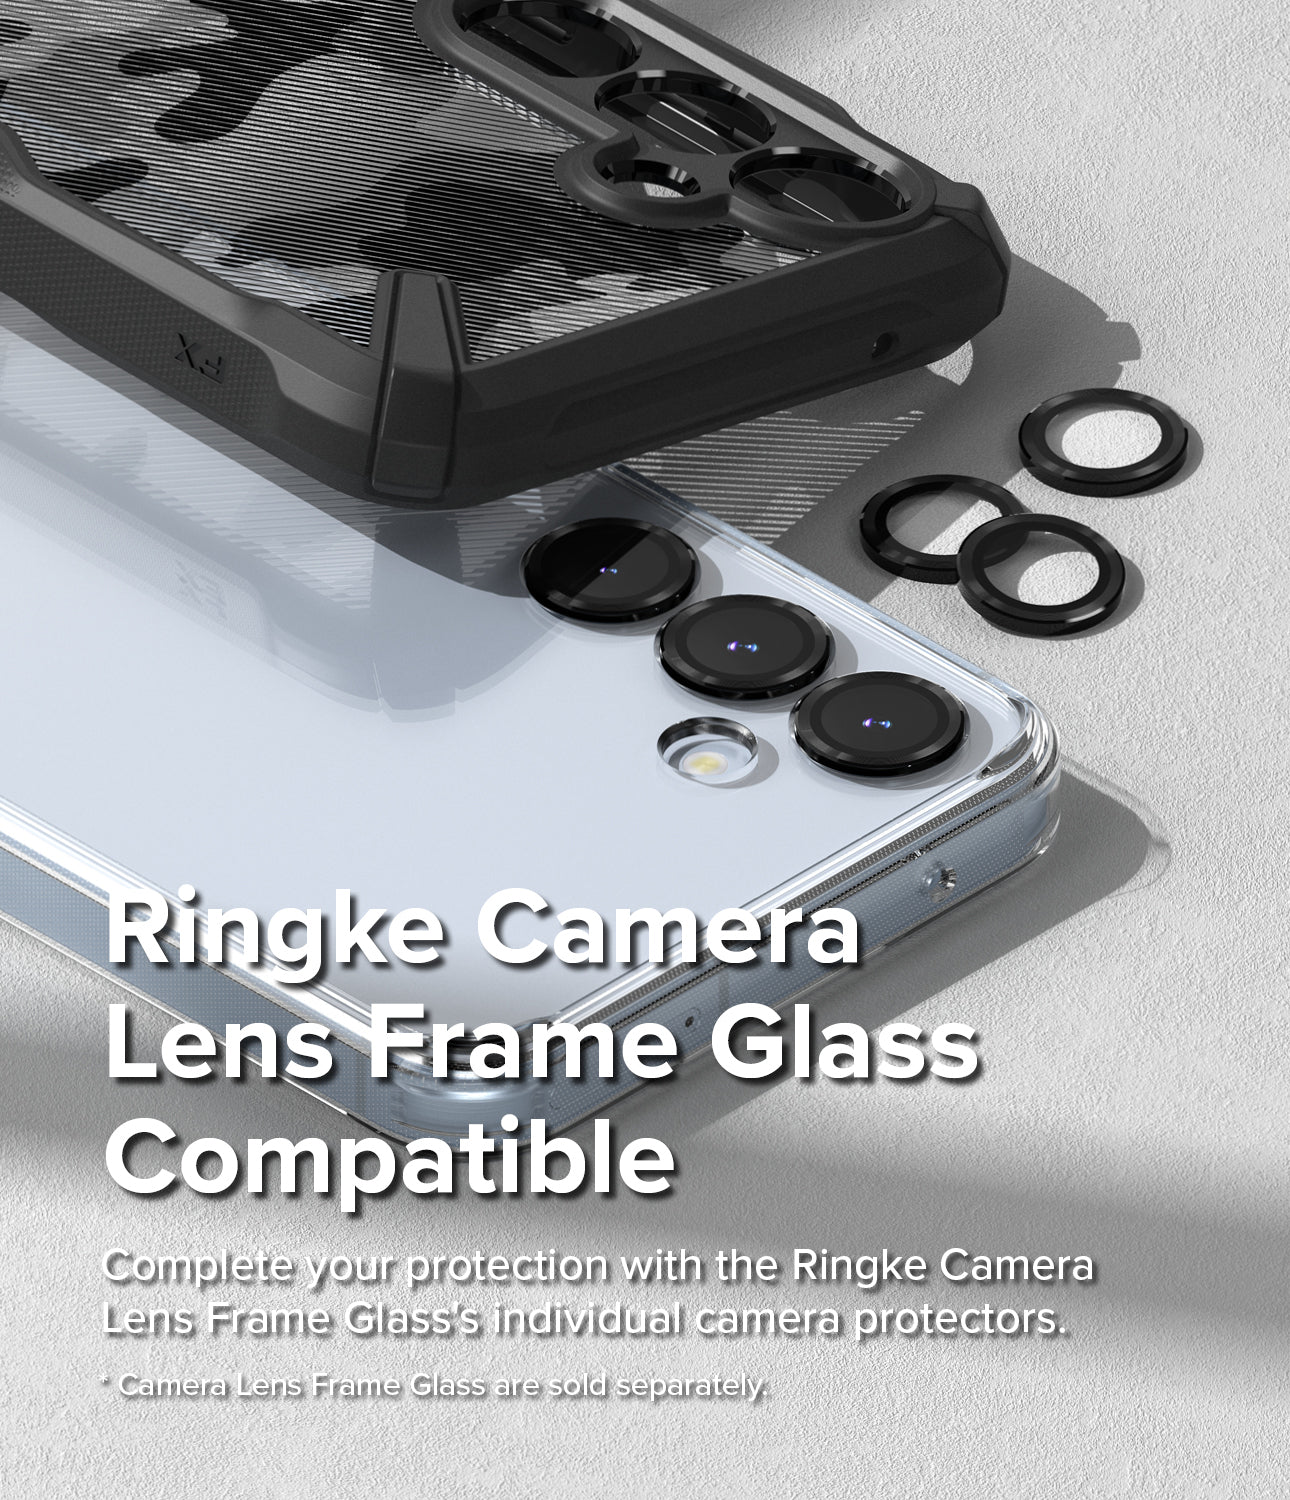 Galaxy A35 Case | Fusion Matte - Ringke Camera Lens Frame Glass Compatible. Complete your protection with the Ringke Camera Lens Frame Glass' individual camera protectors.